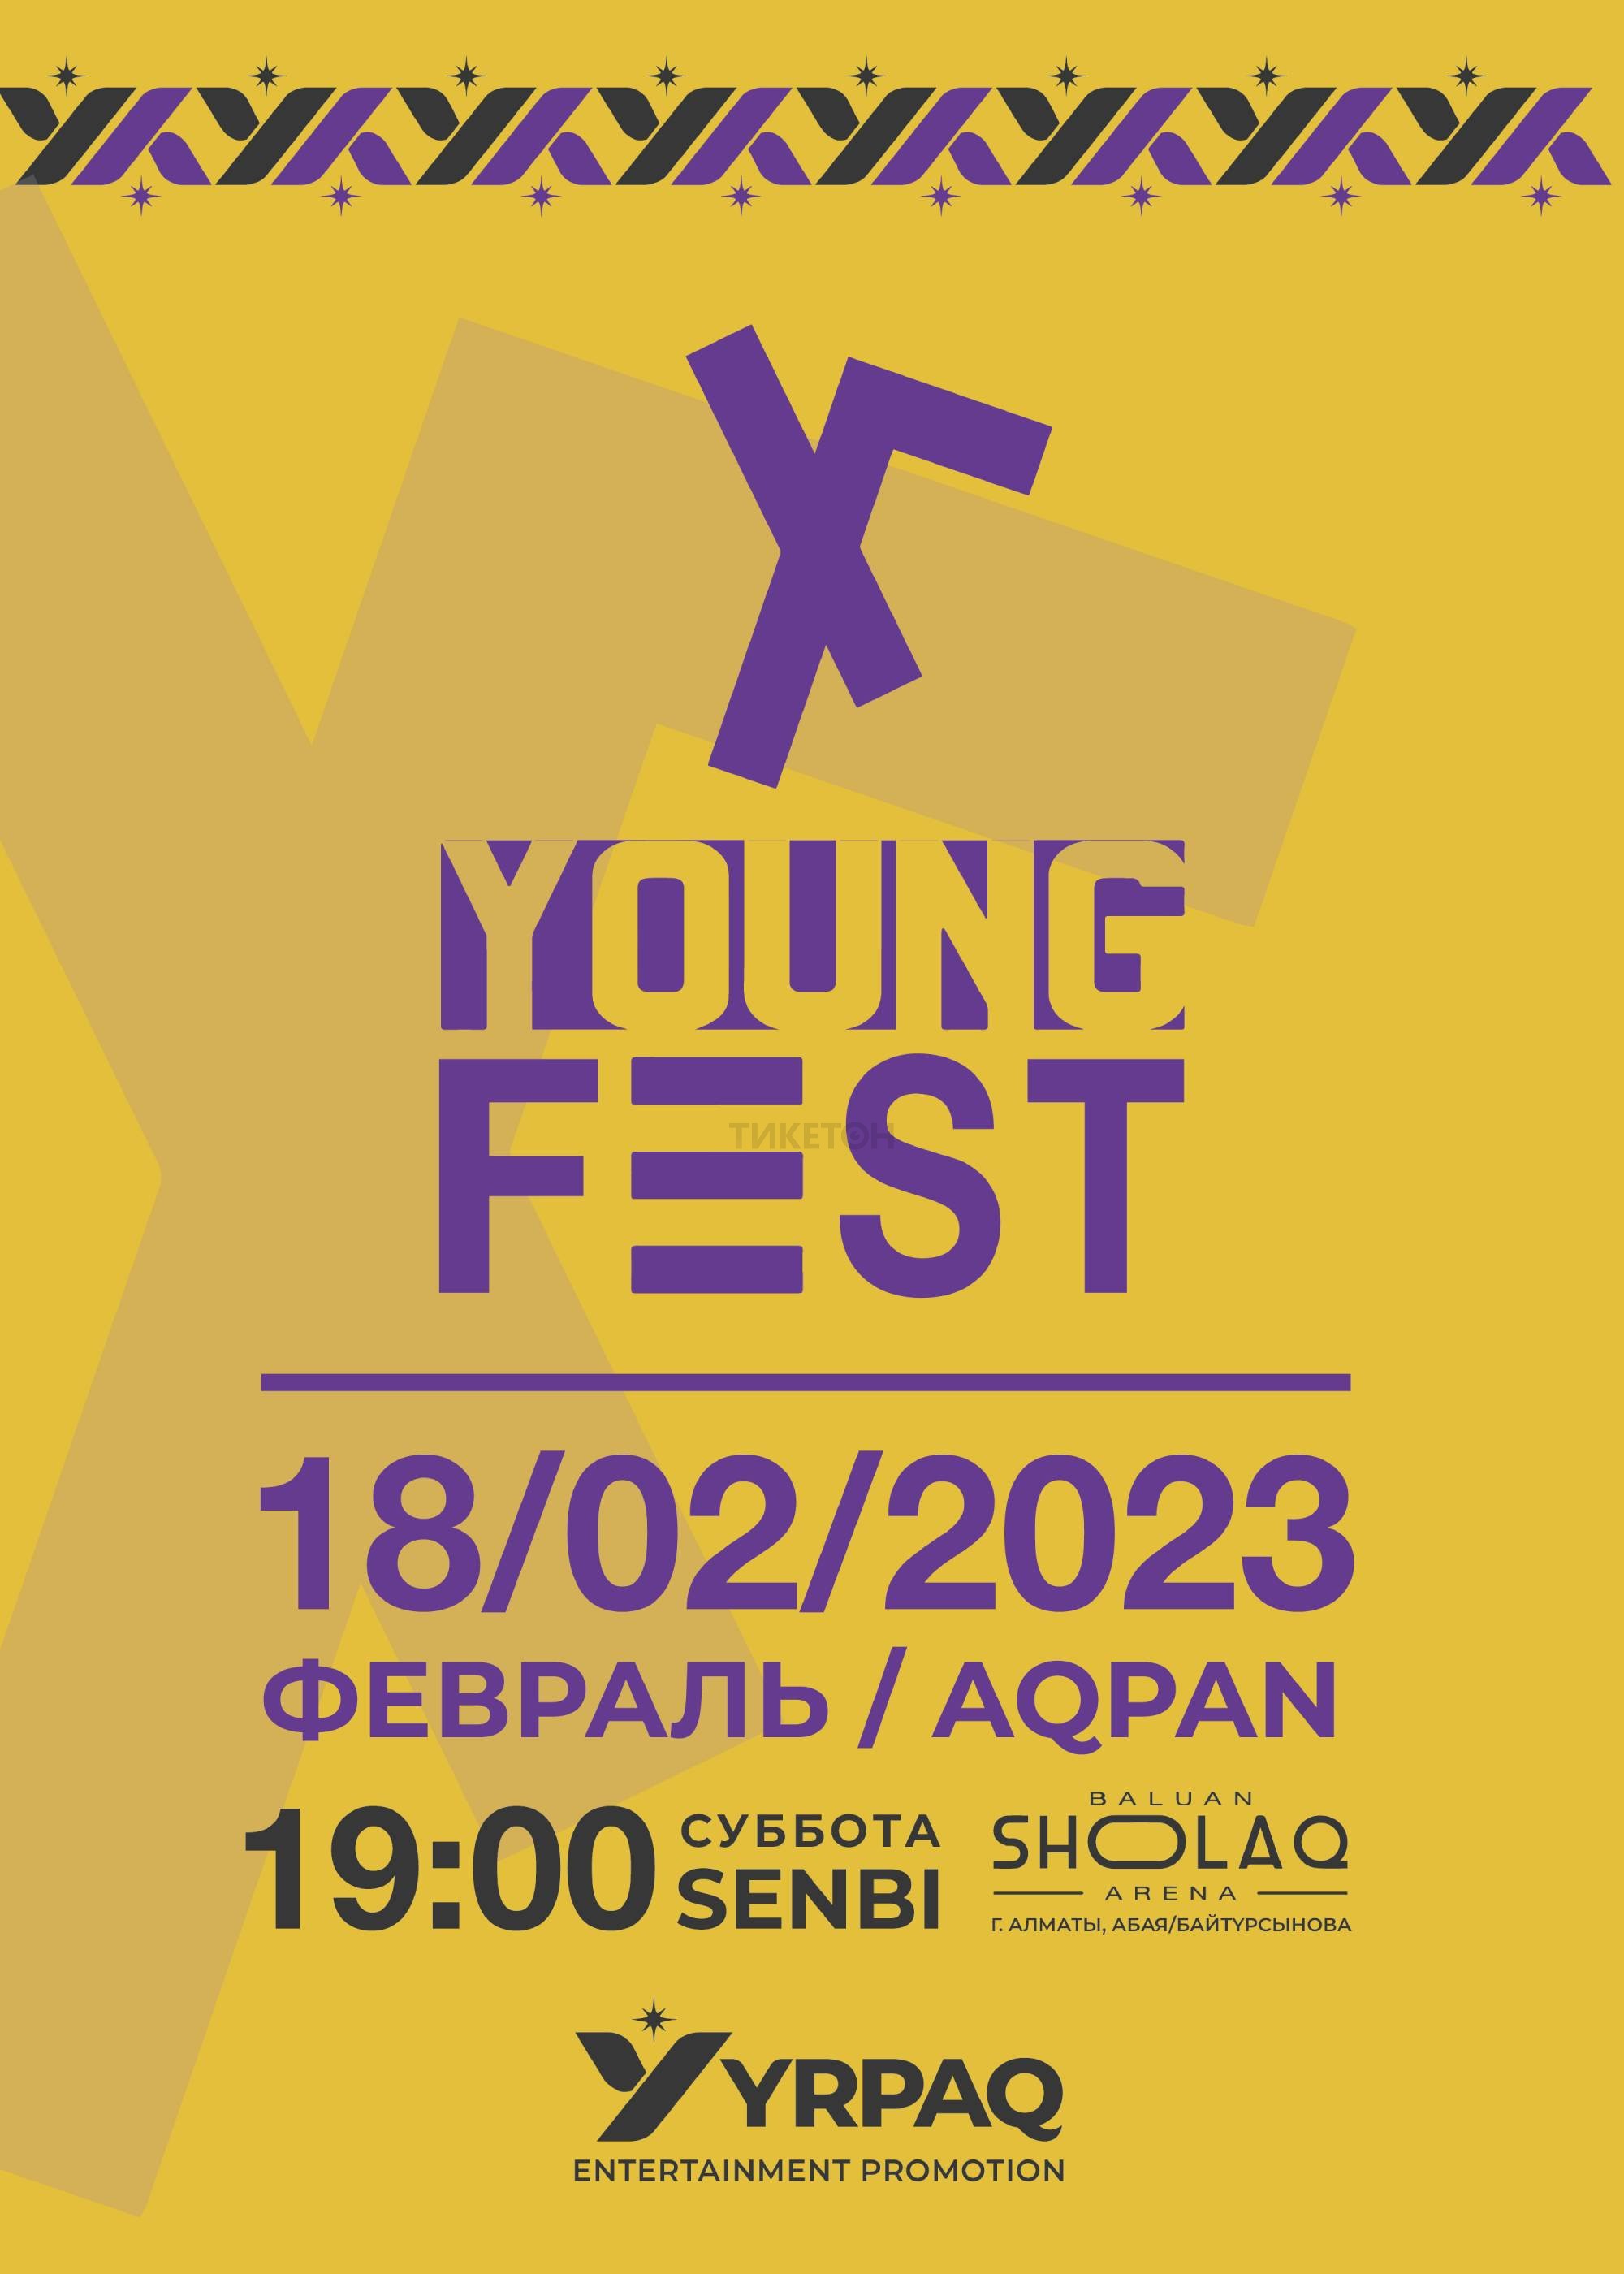 YOUNGFEST